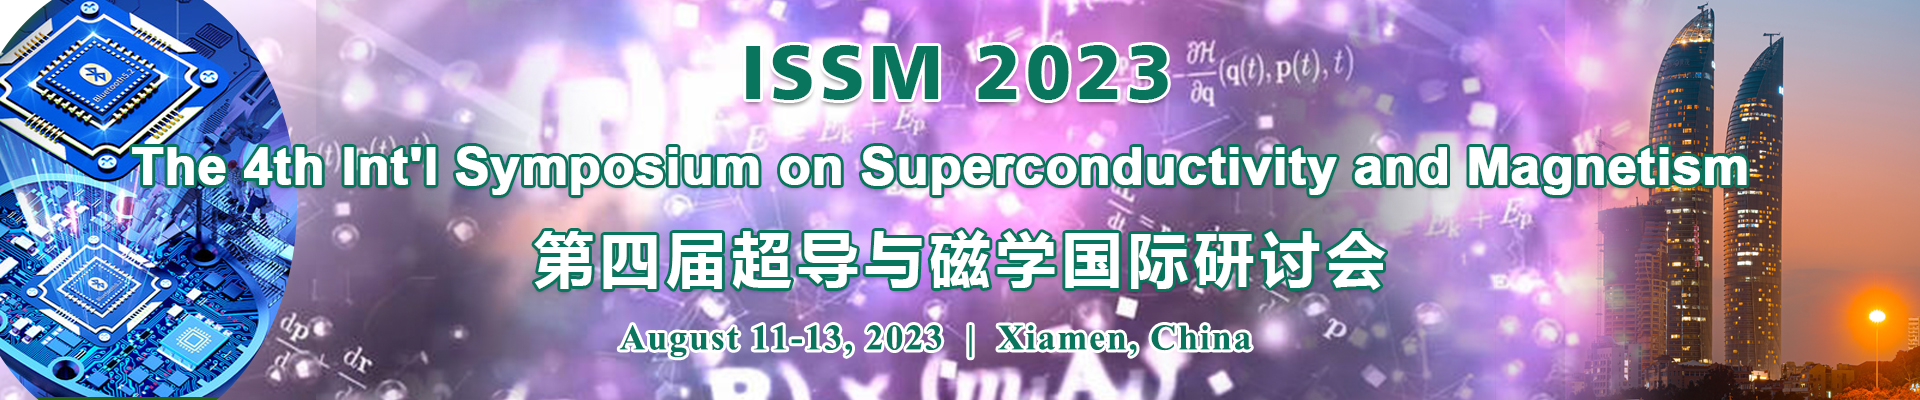 The 4th Int'l Symposium on Superconductivity and Magnetism (ISSM 2023)